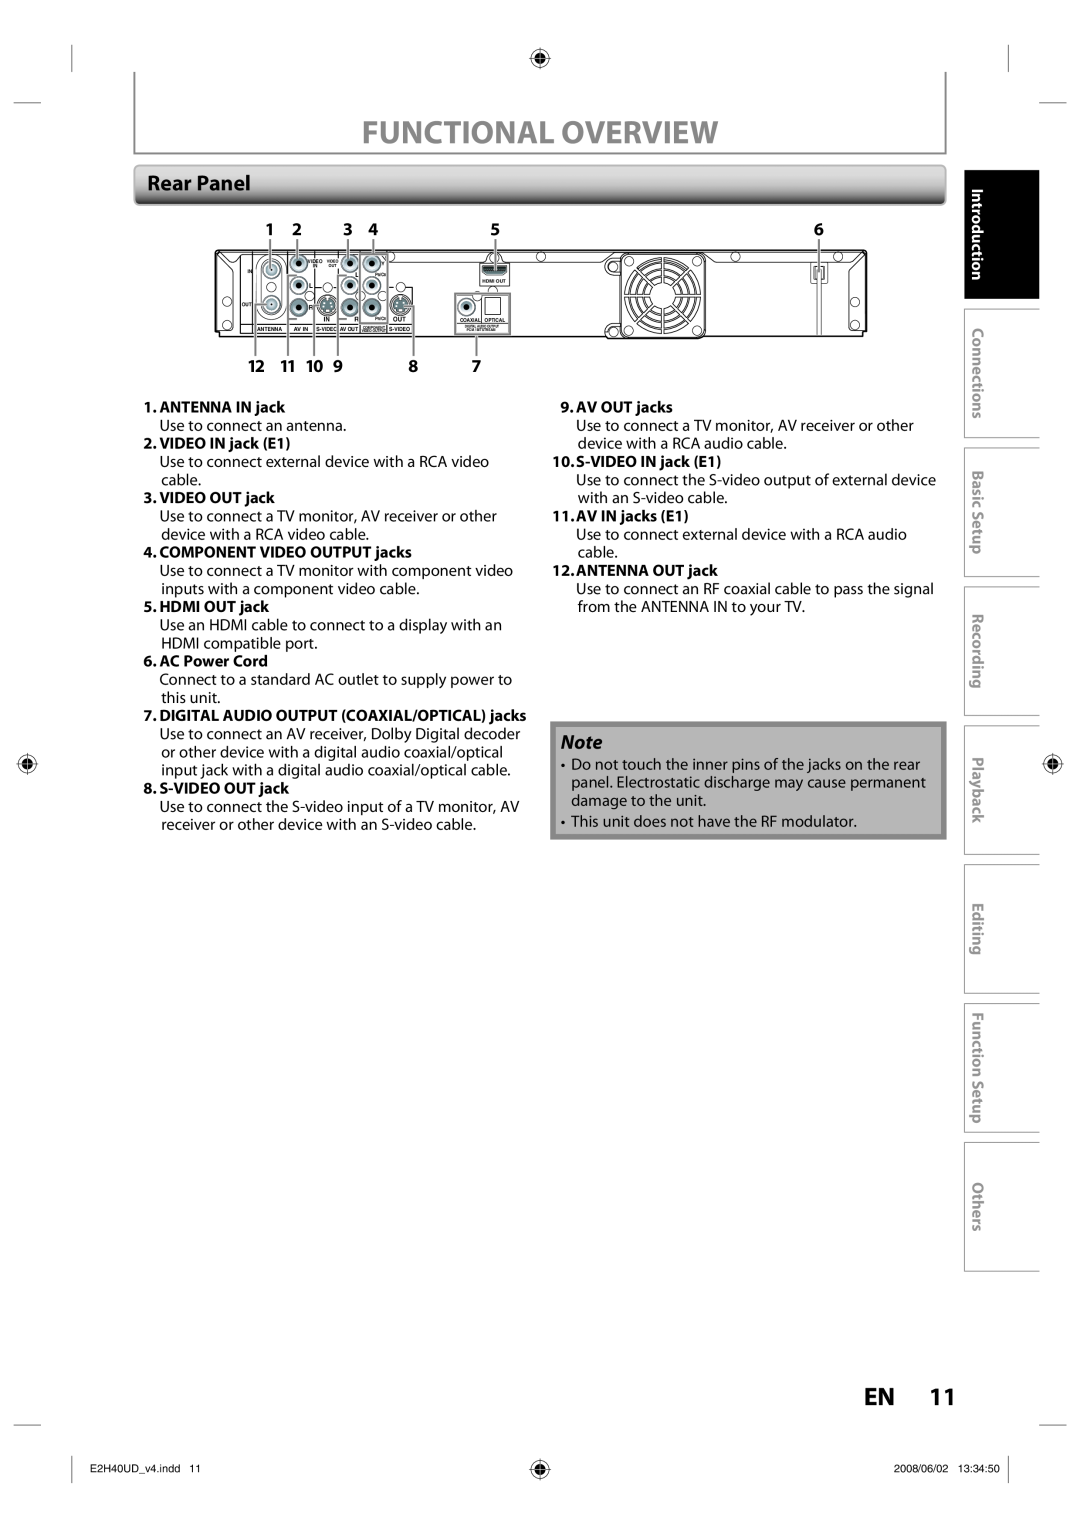 Philips DVDR3575H/37 Functional Overview, Rear Panel, 11 10, Introduction, ANTENNA IN jack, VIDEO IN jack E1, AV OUT jacks 